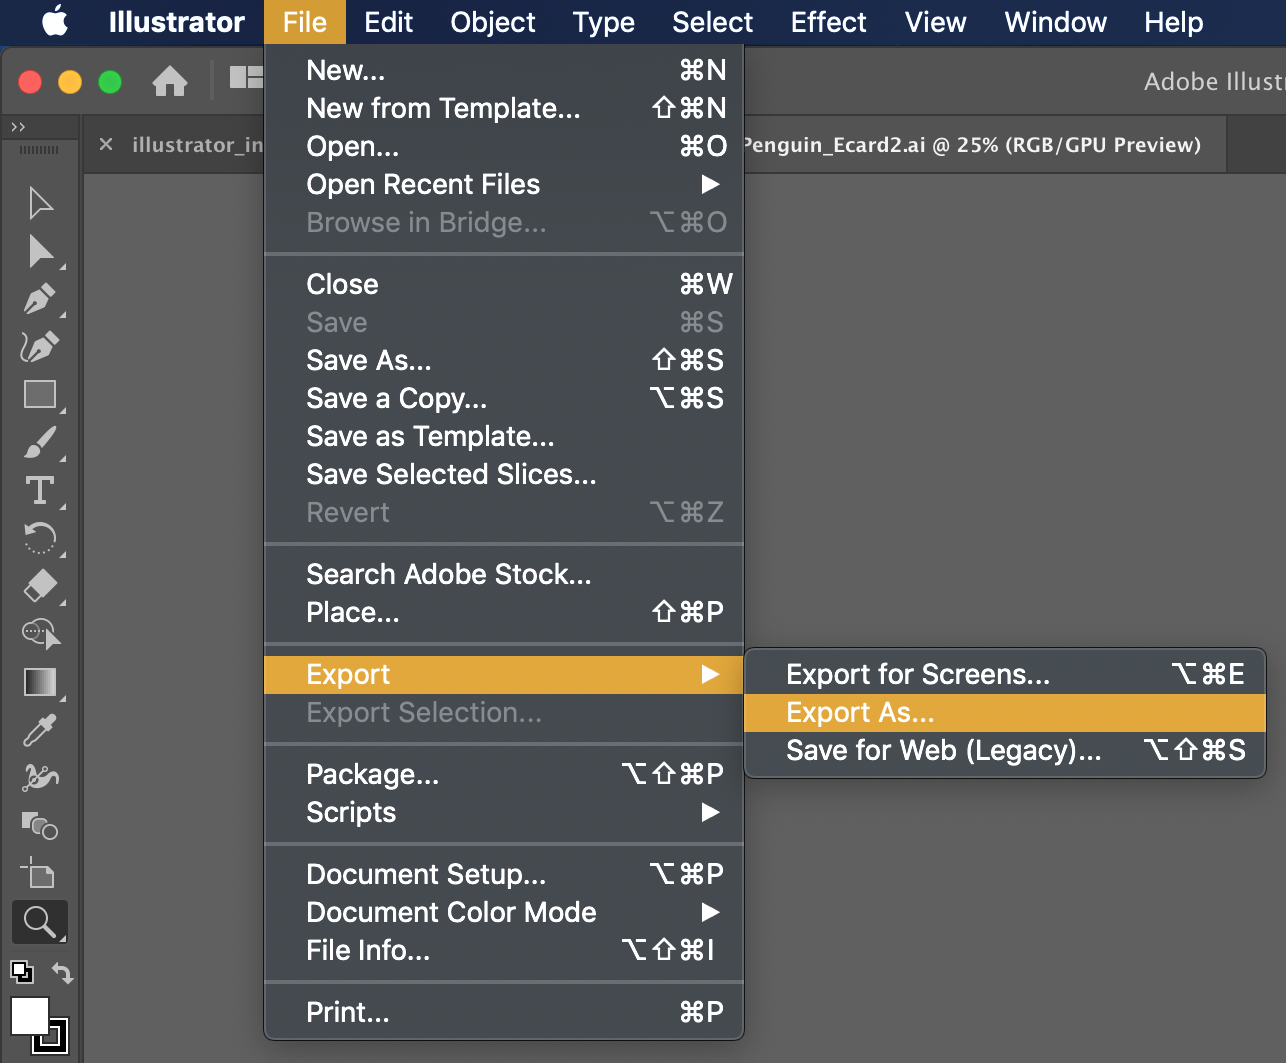 A screenshot showing File > Export > Export As... selected